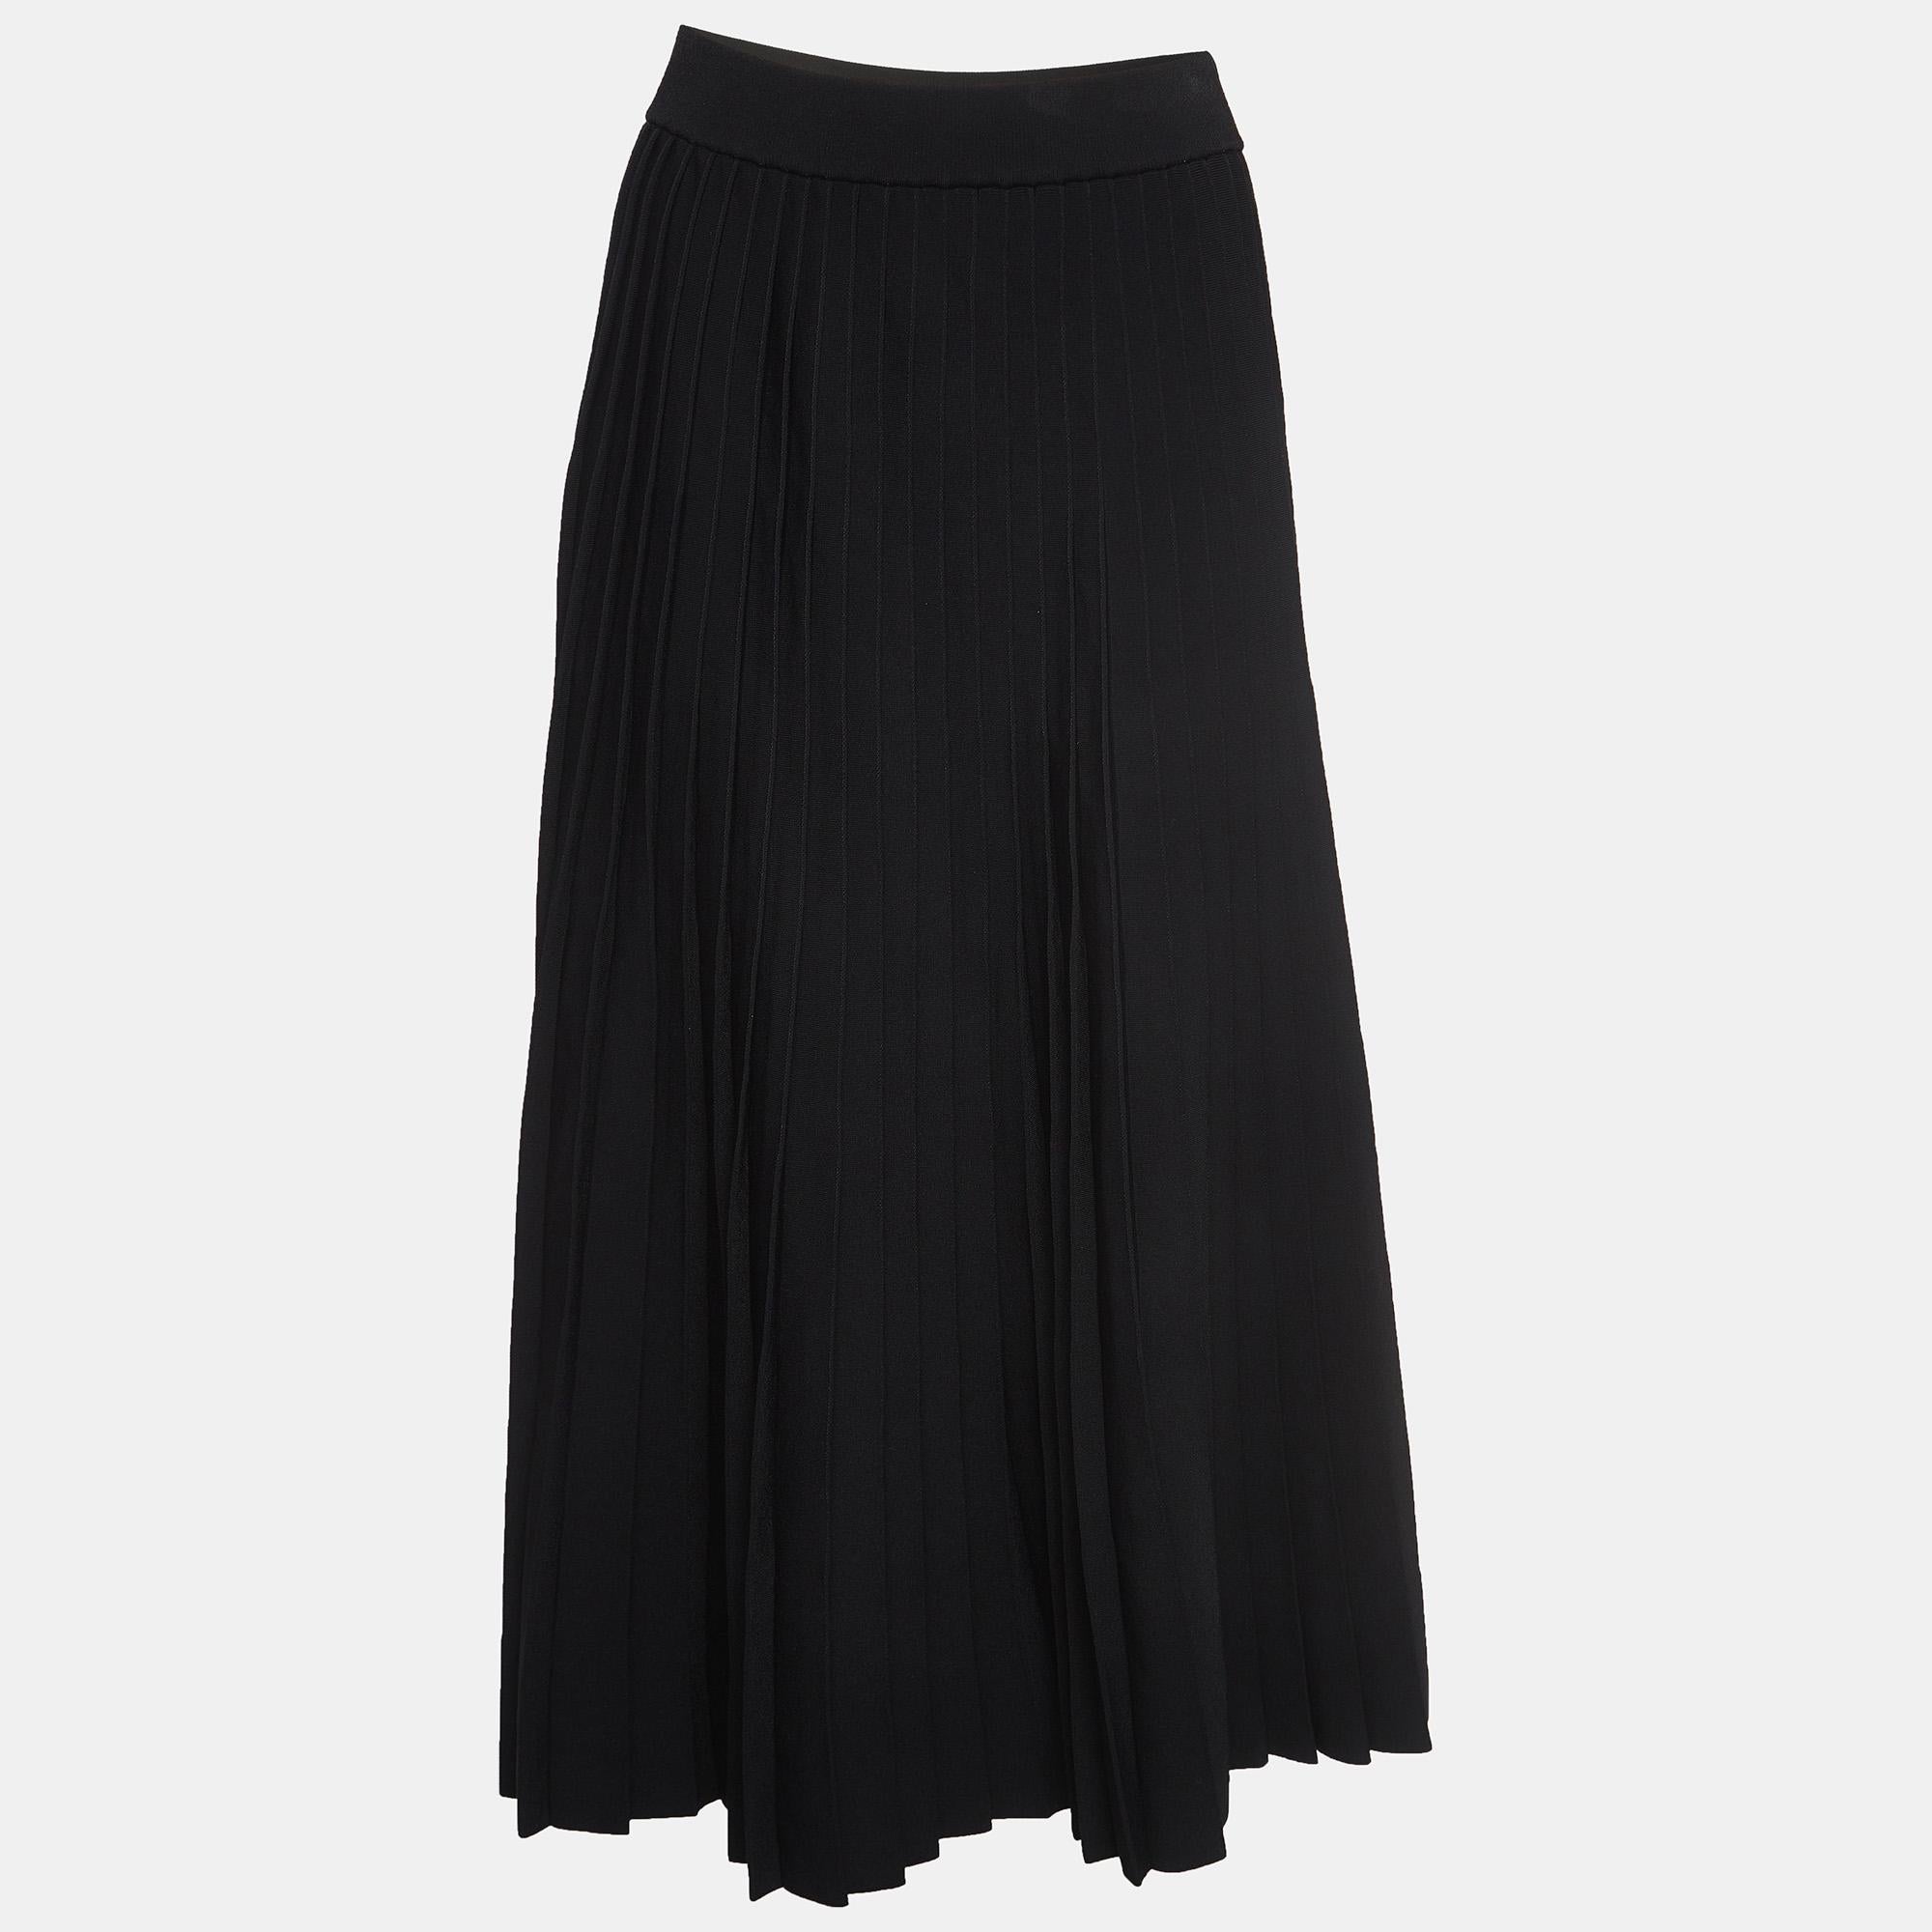 This elegant Balenciaga skirt is worth adding to your closet! Crafted from fine materials, it is exquisitely designed into a flattering shape.

